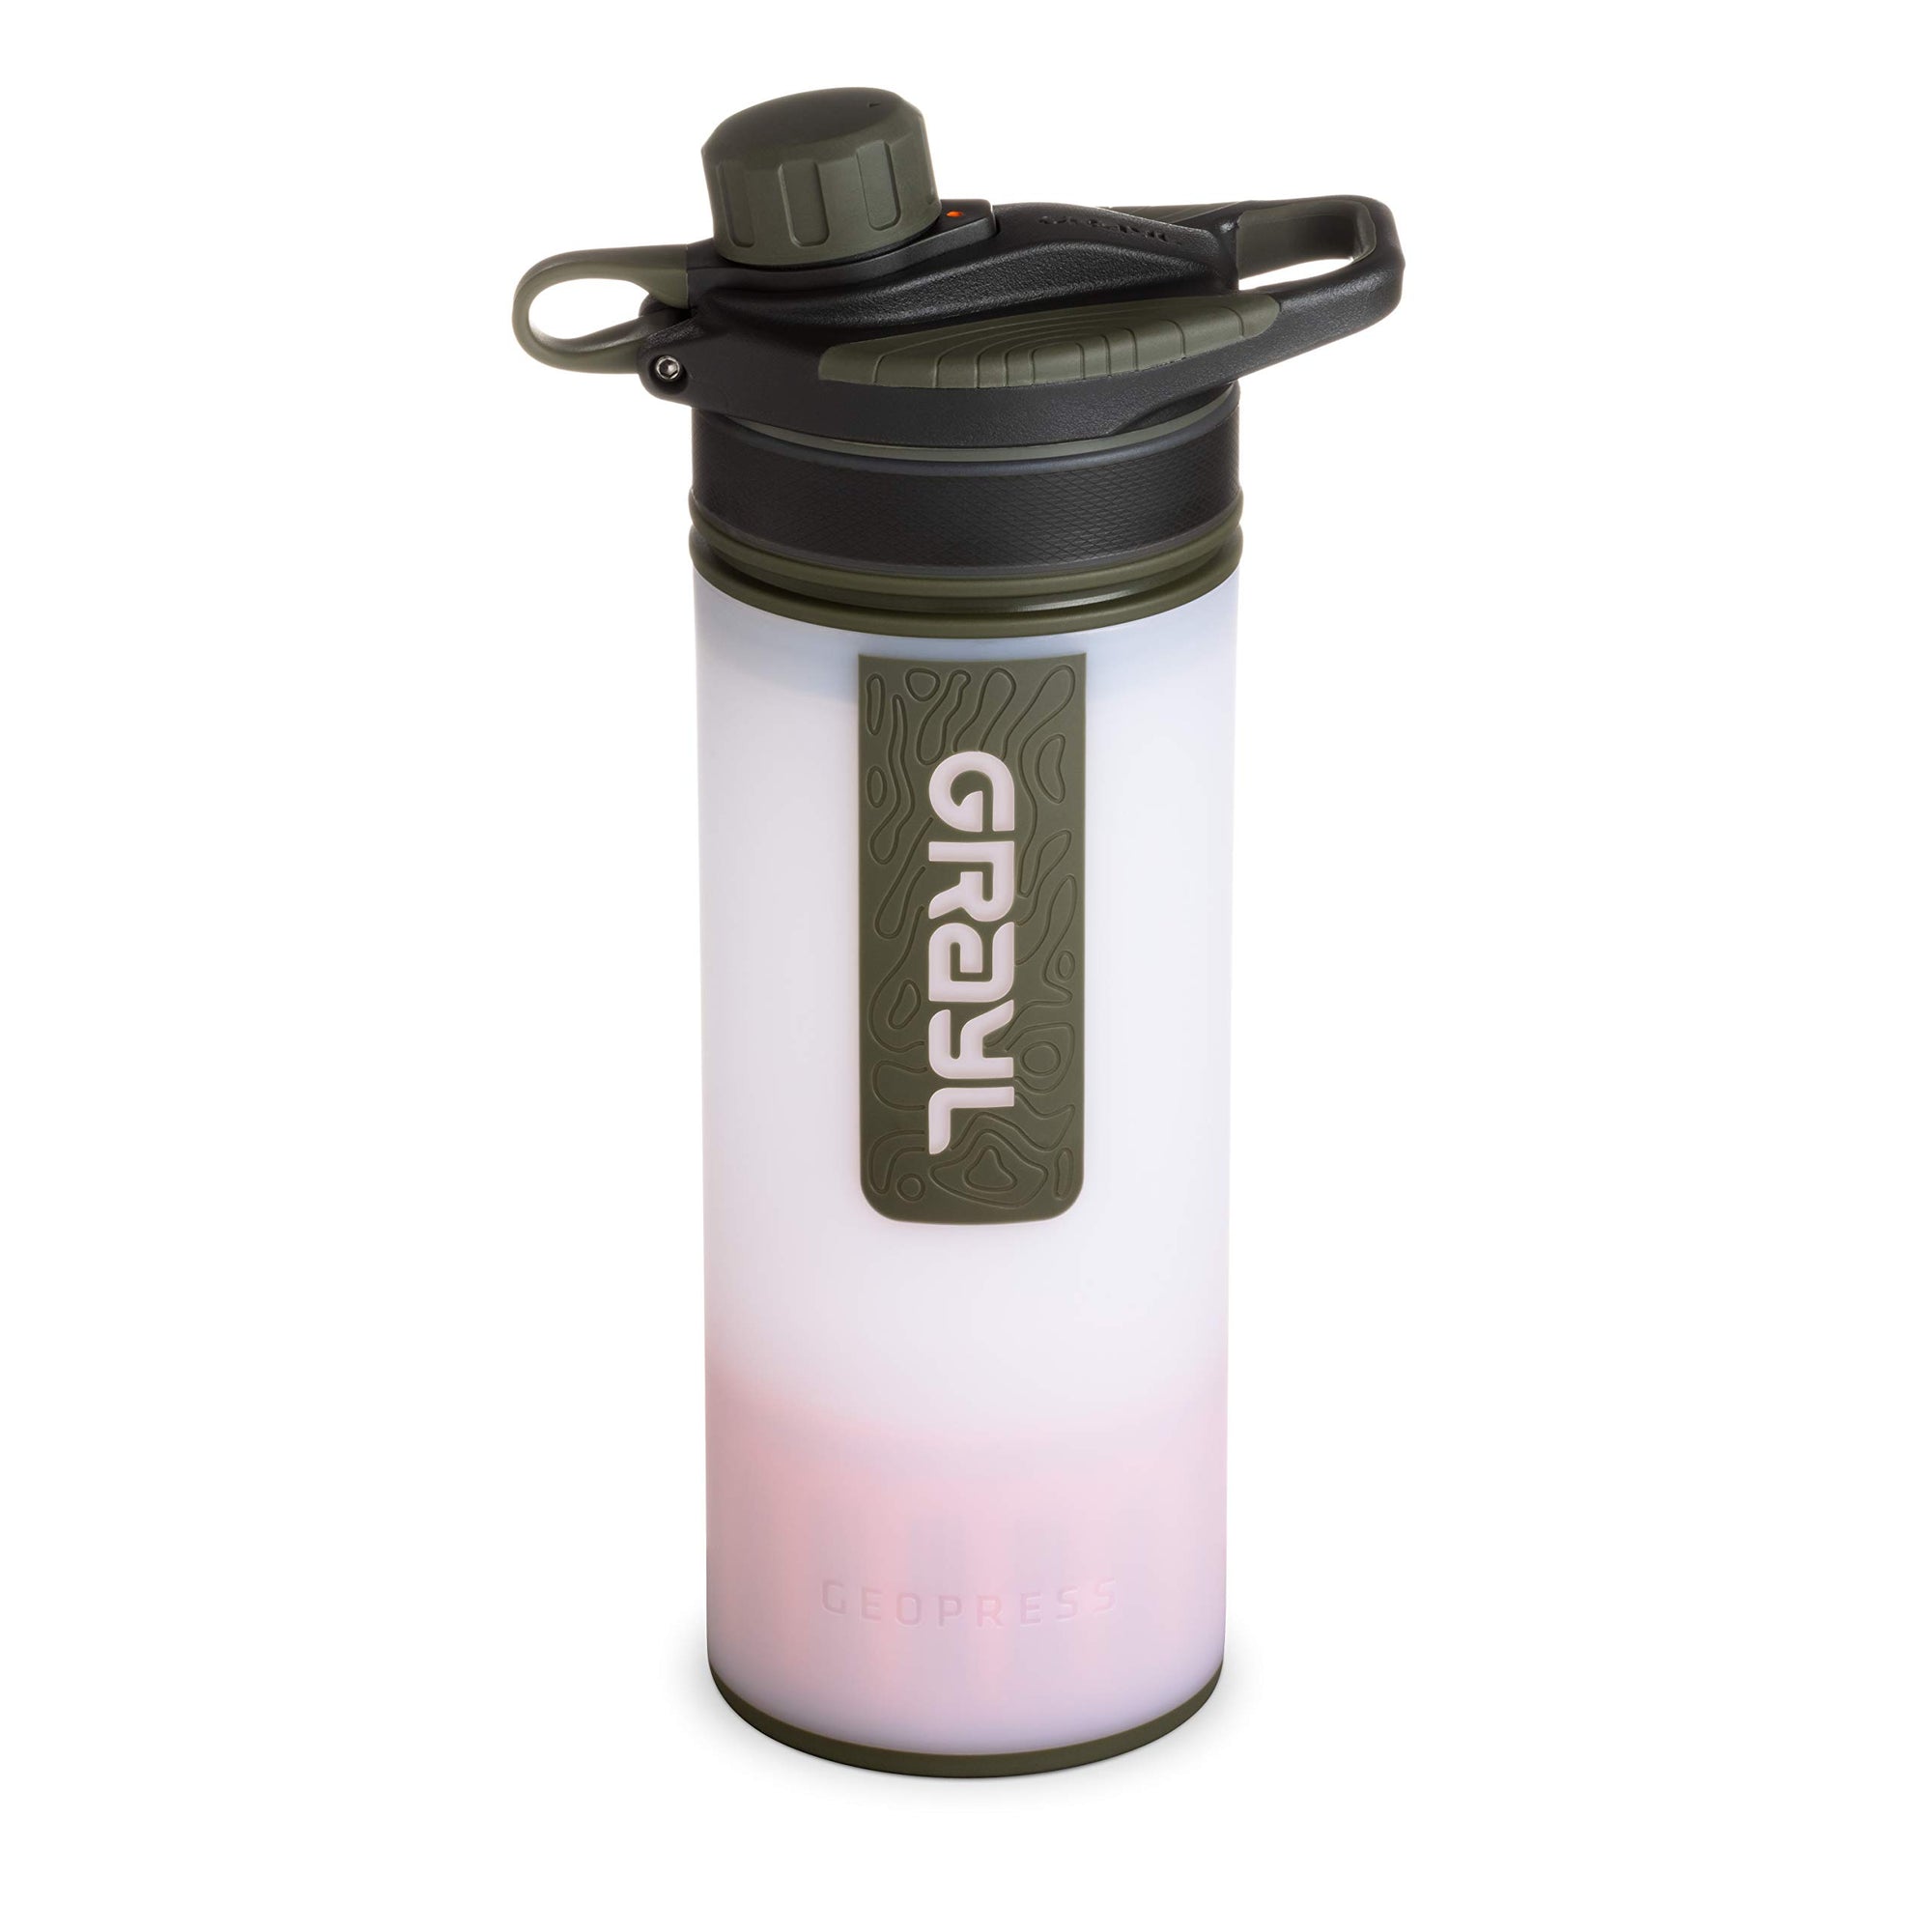 GRAYL Geopress 24 oz Water Purifier for Global Travel, Backpacking, Hiking, and Survival